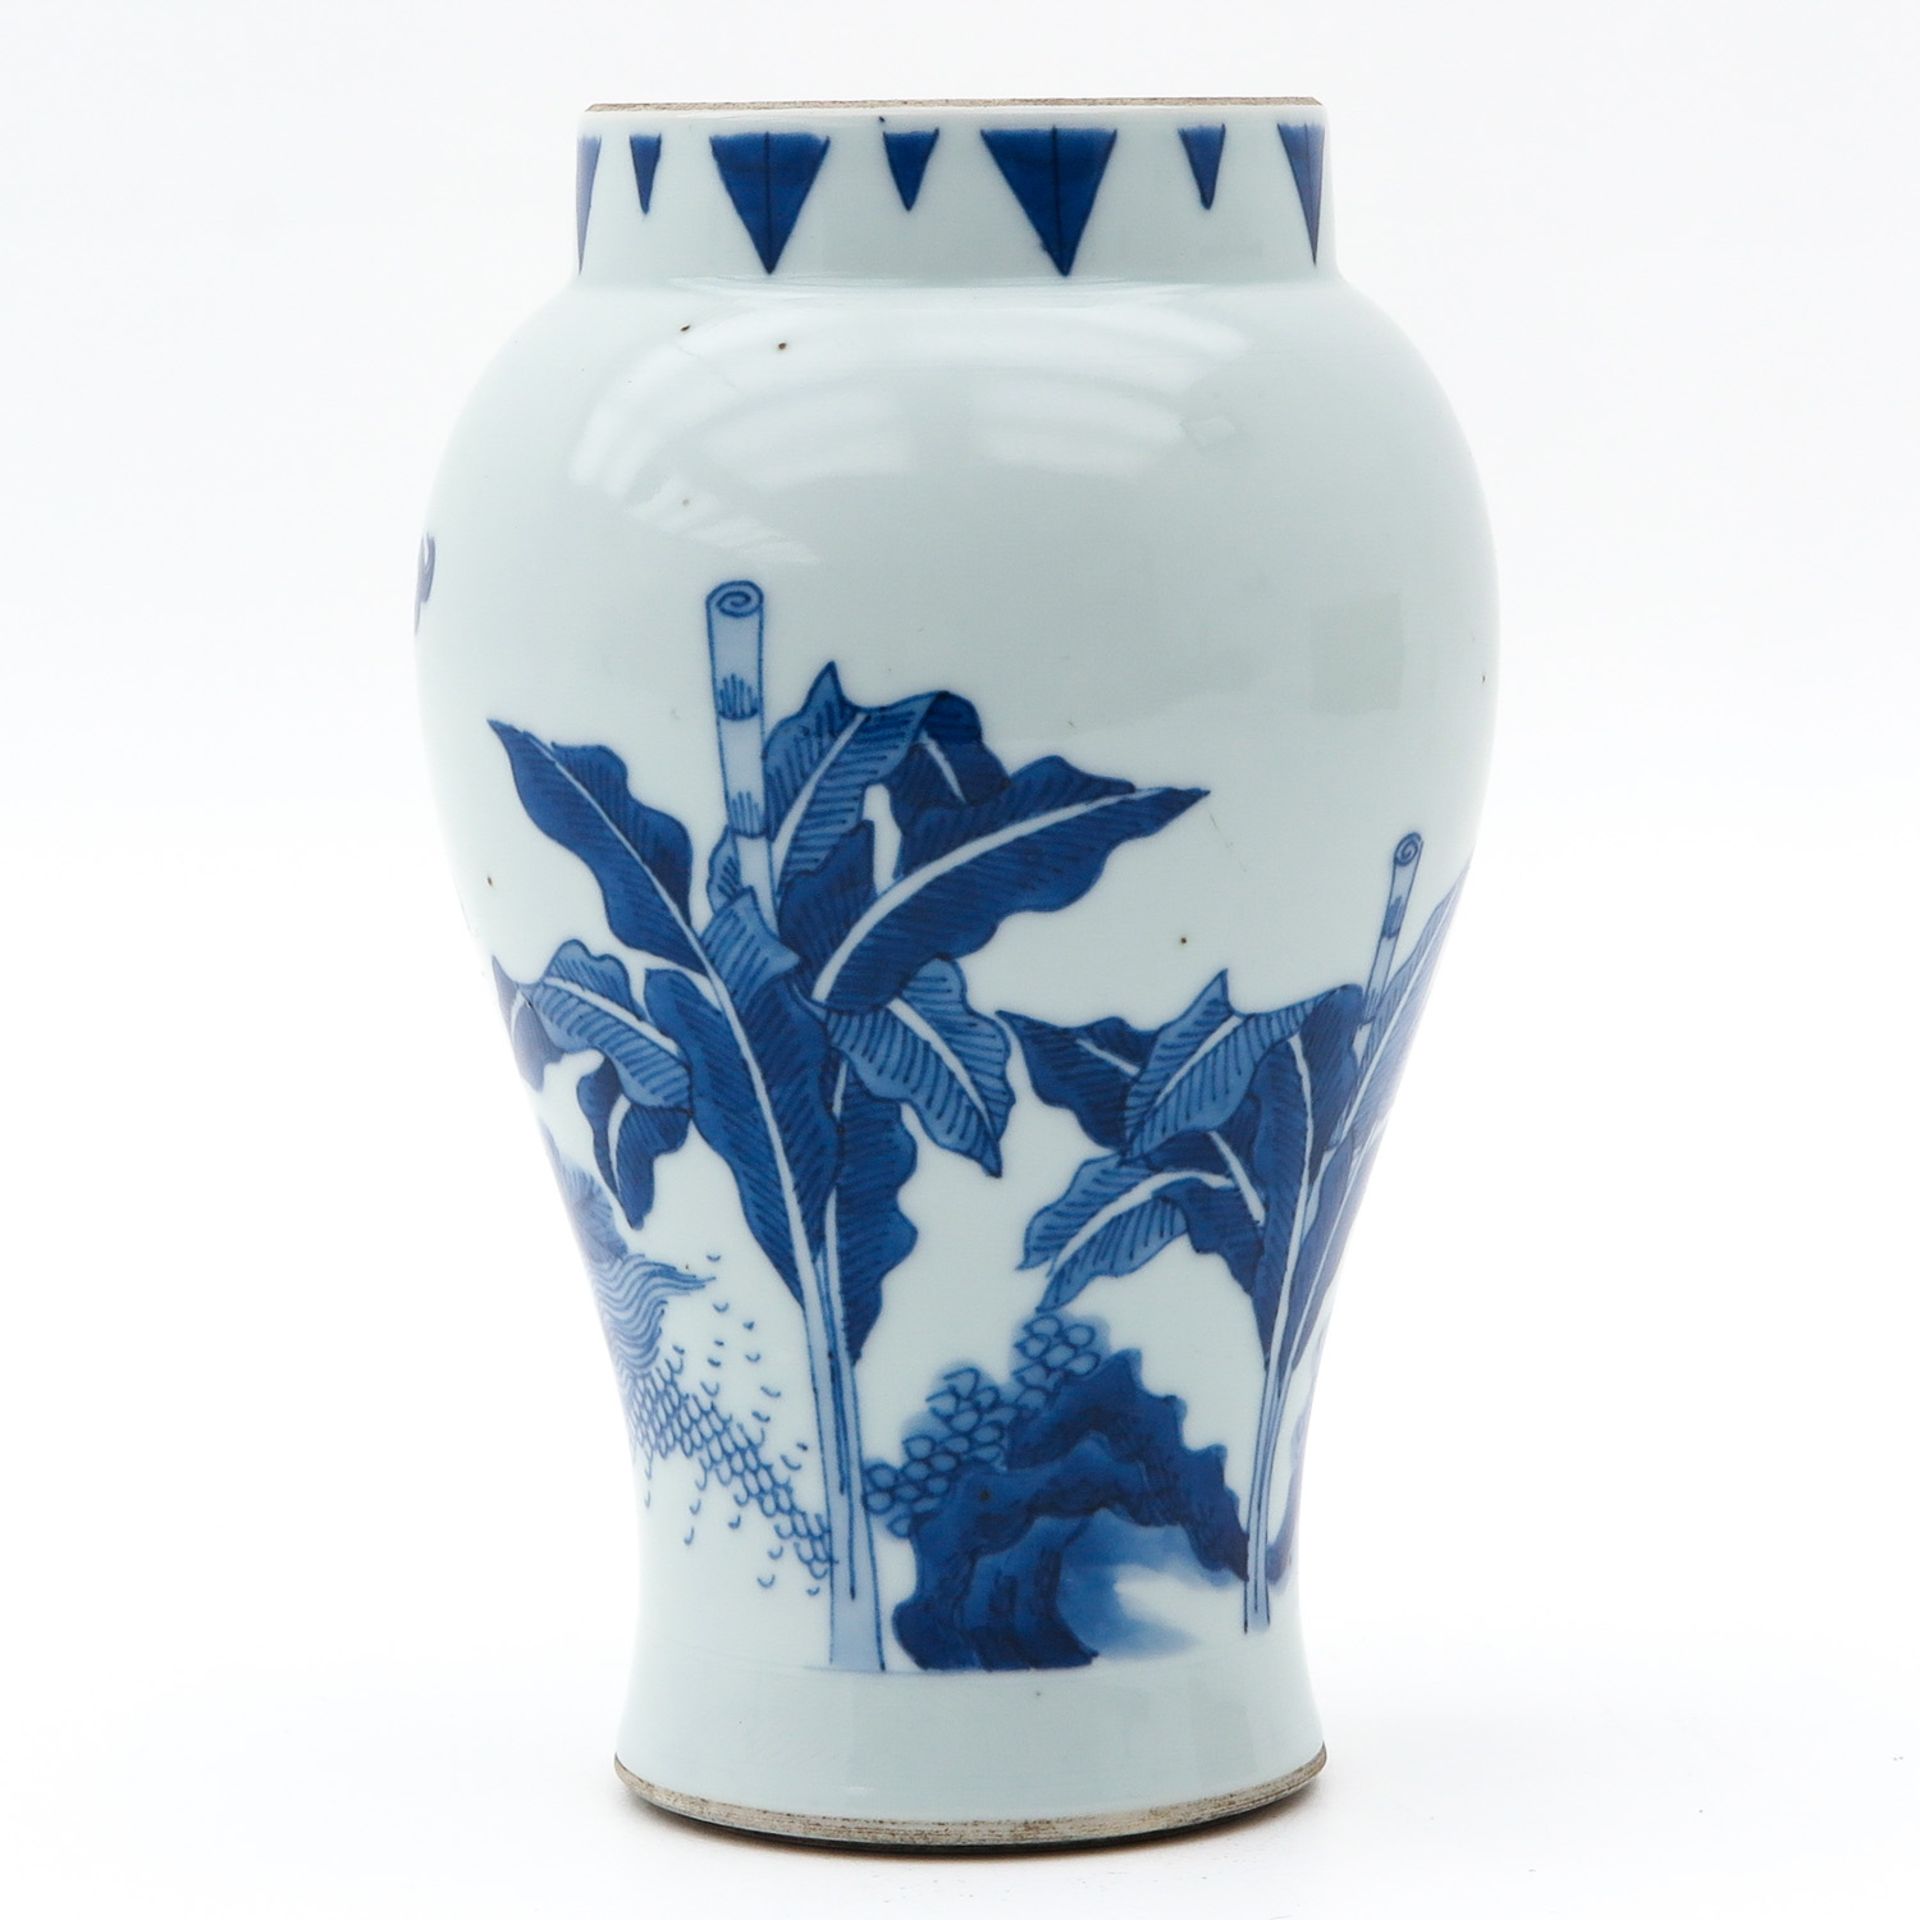 A Blue and White Vase - Image 3 of 10